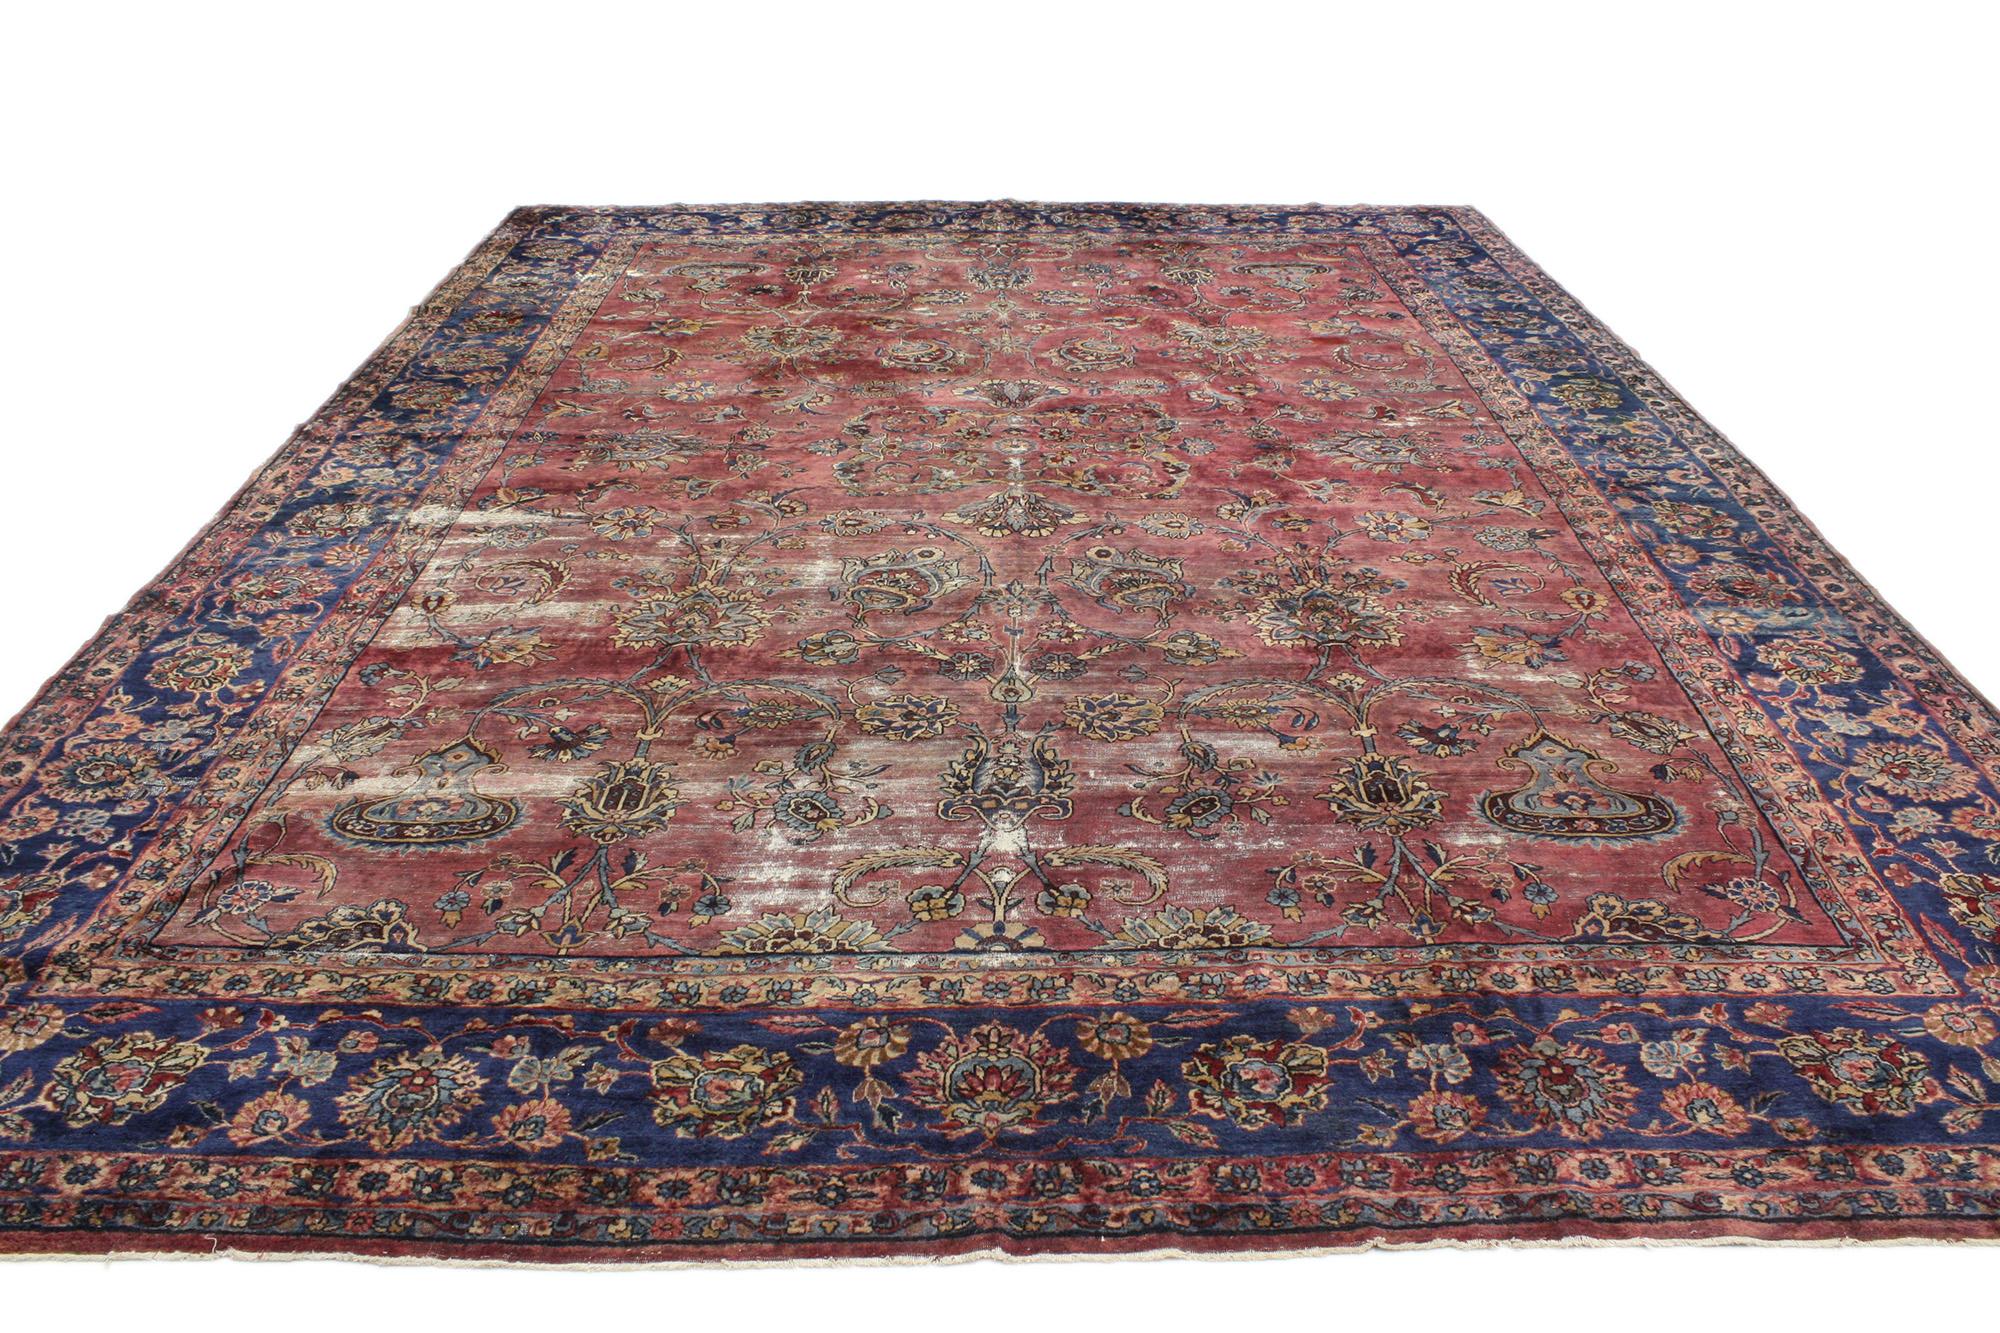 Kirman Distressed Antique Persian Kerman Rug with New England Cape Cod Style For Sale